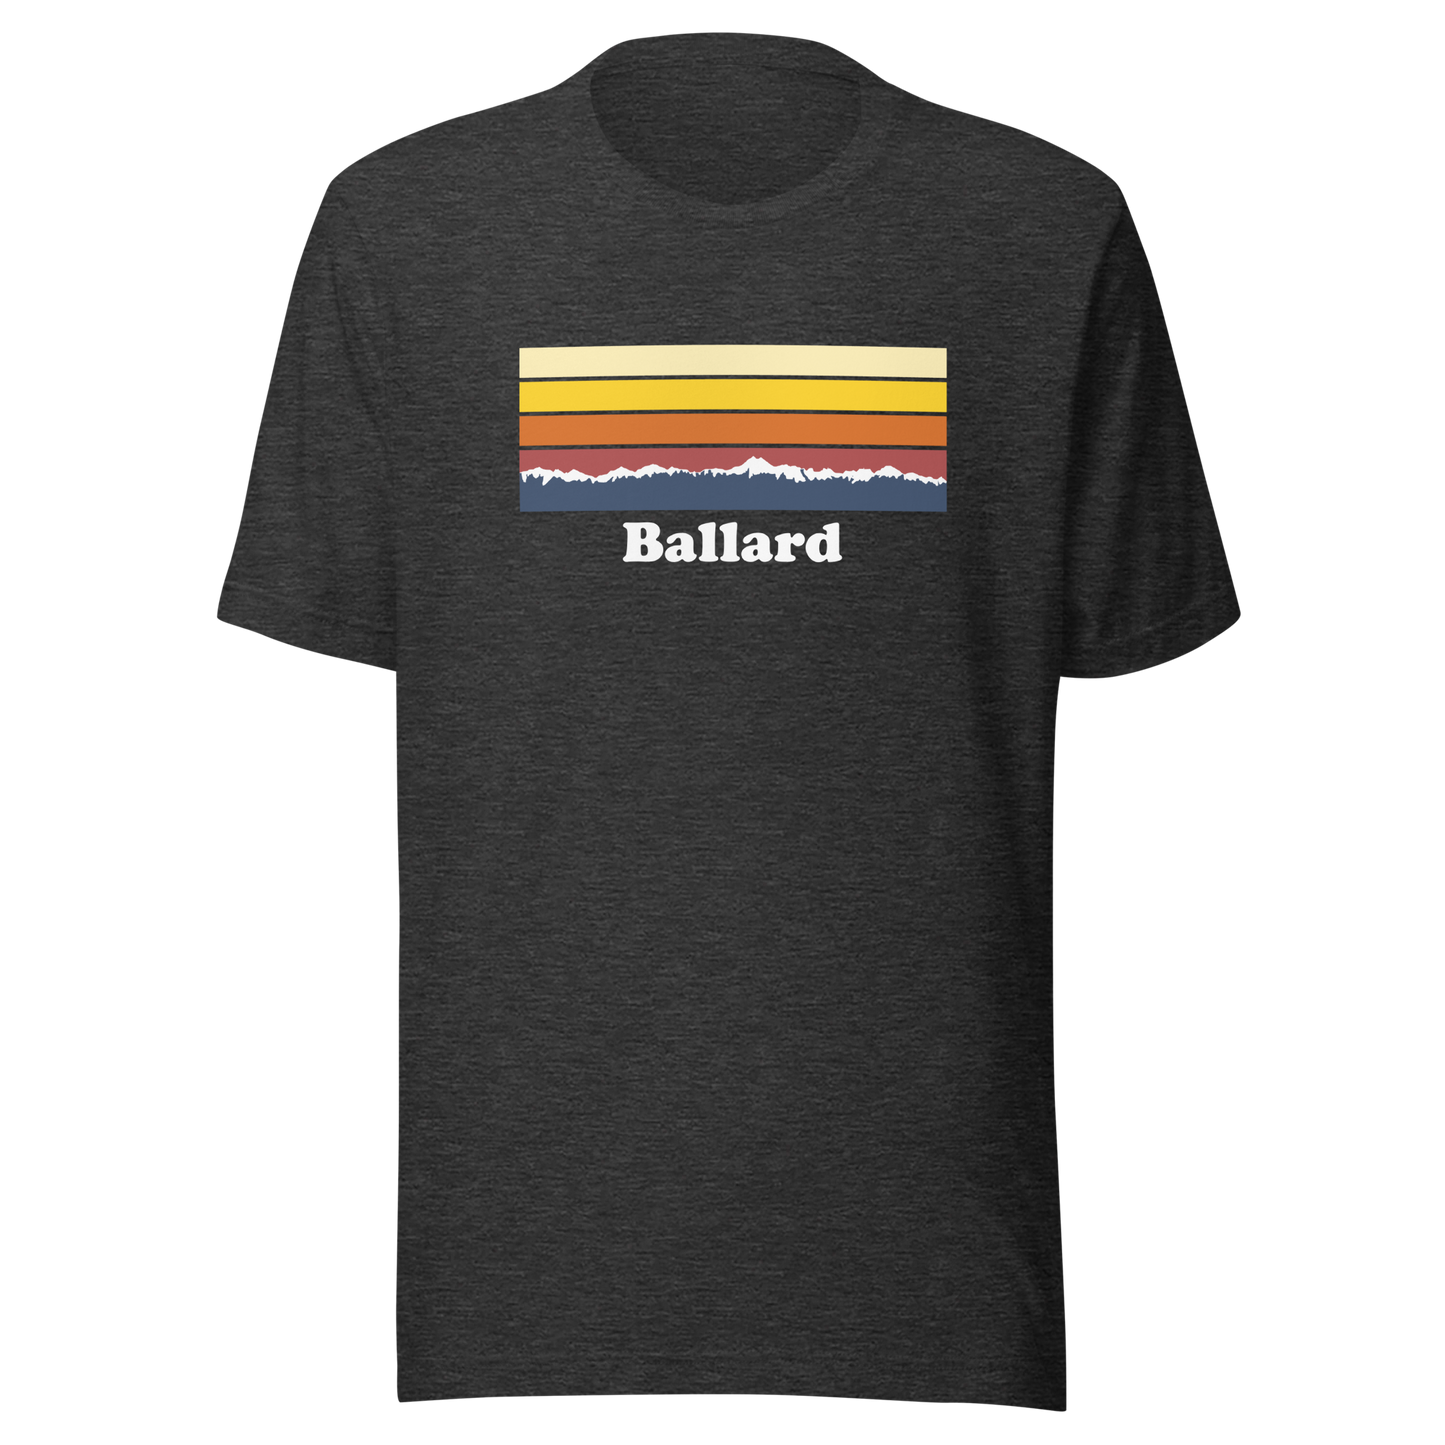 Ballard and the Olympic Mountains unisex t-shirt